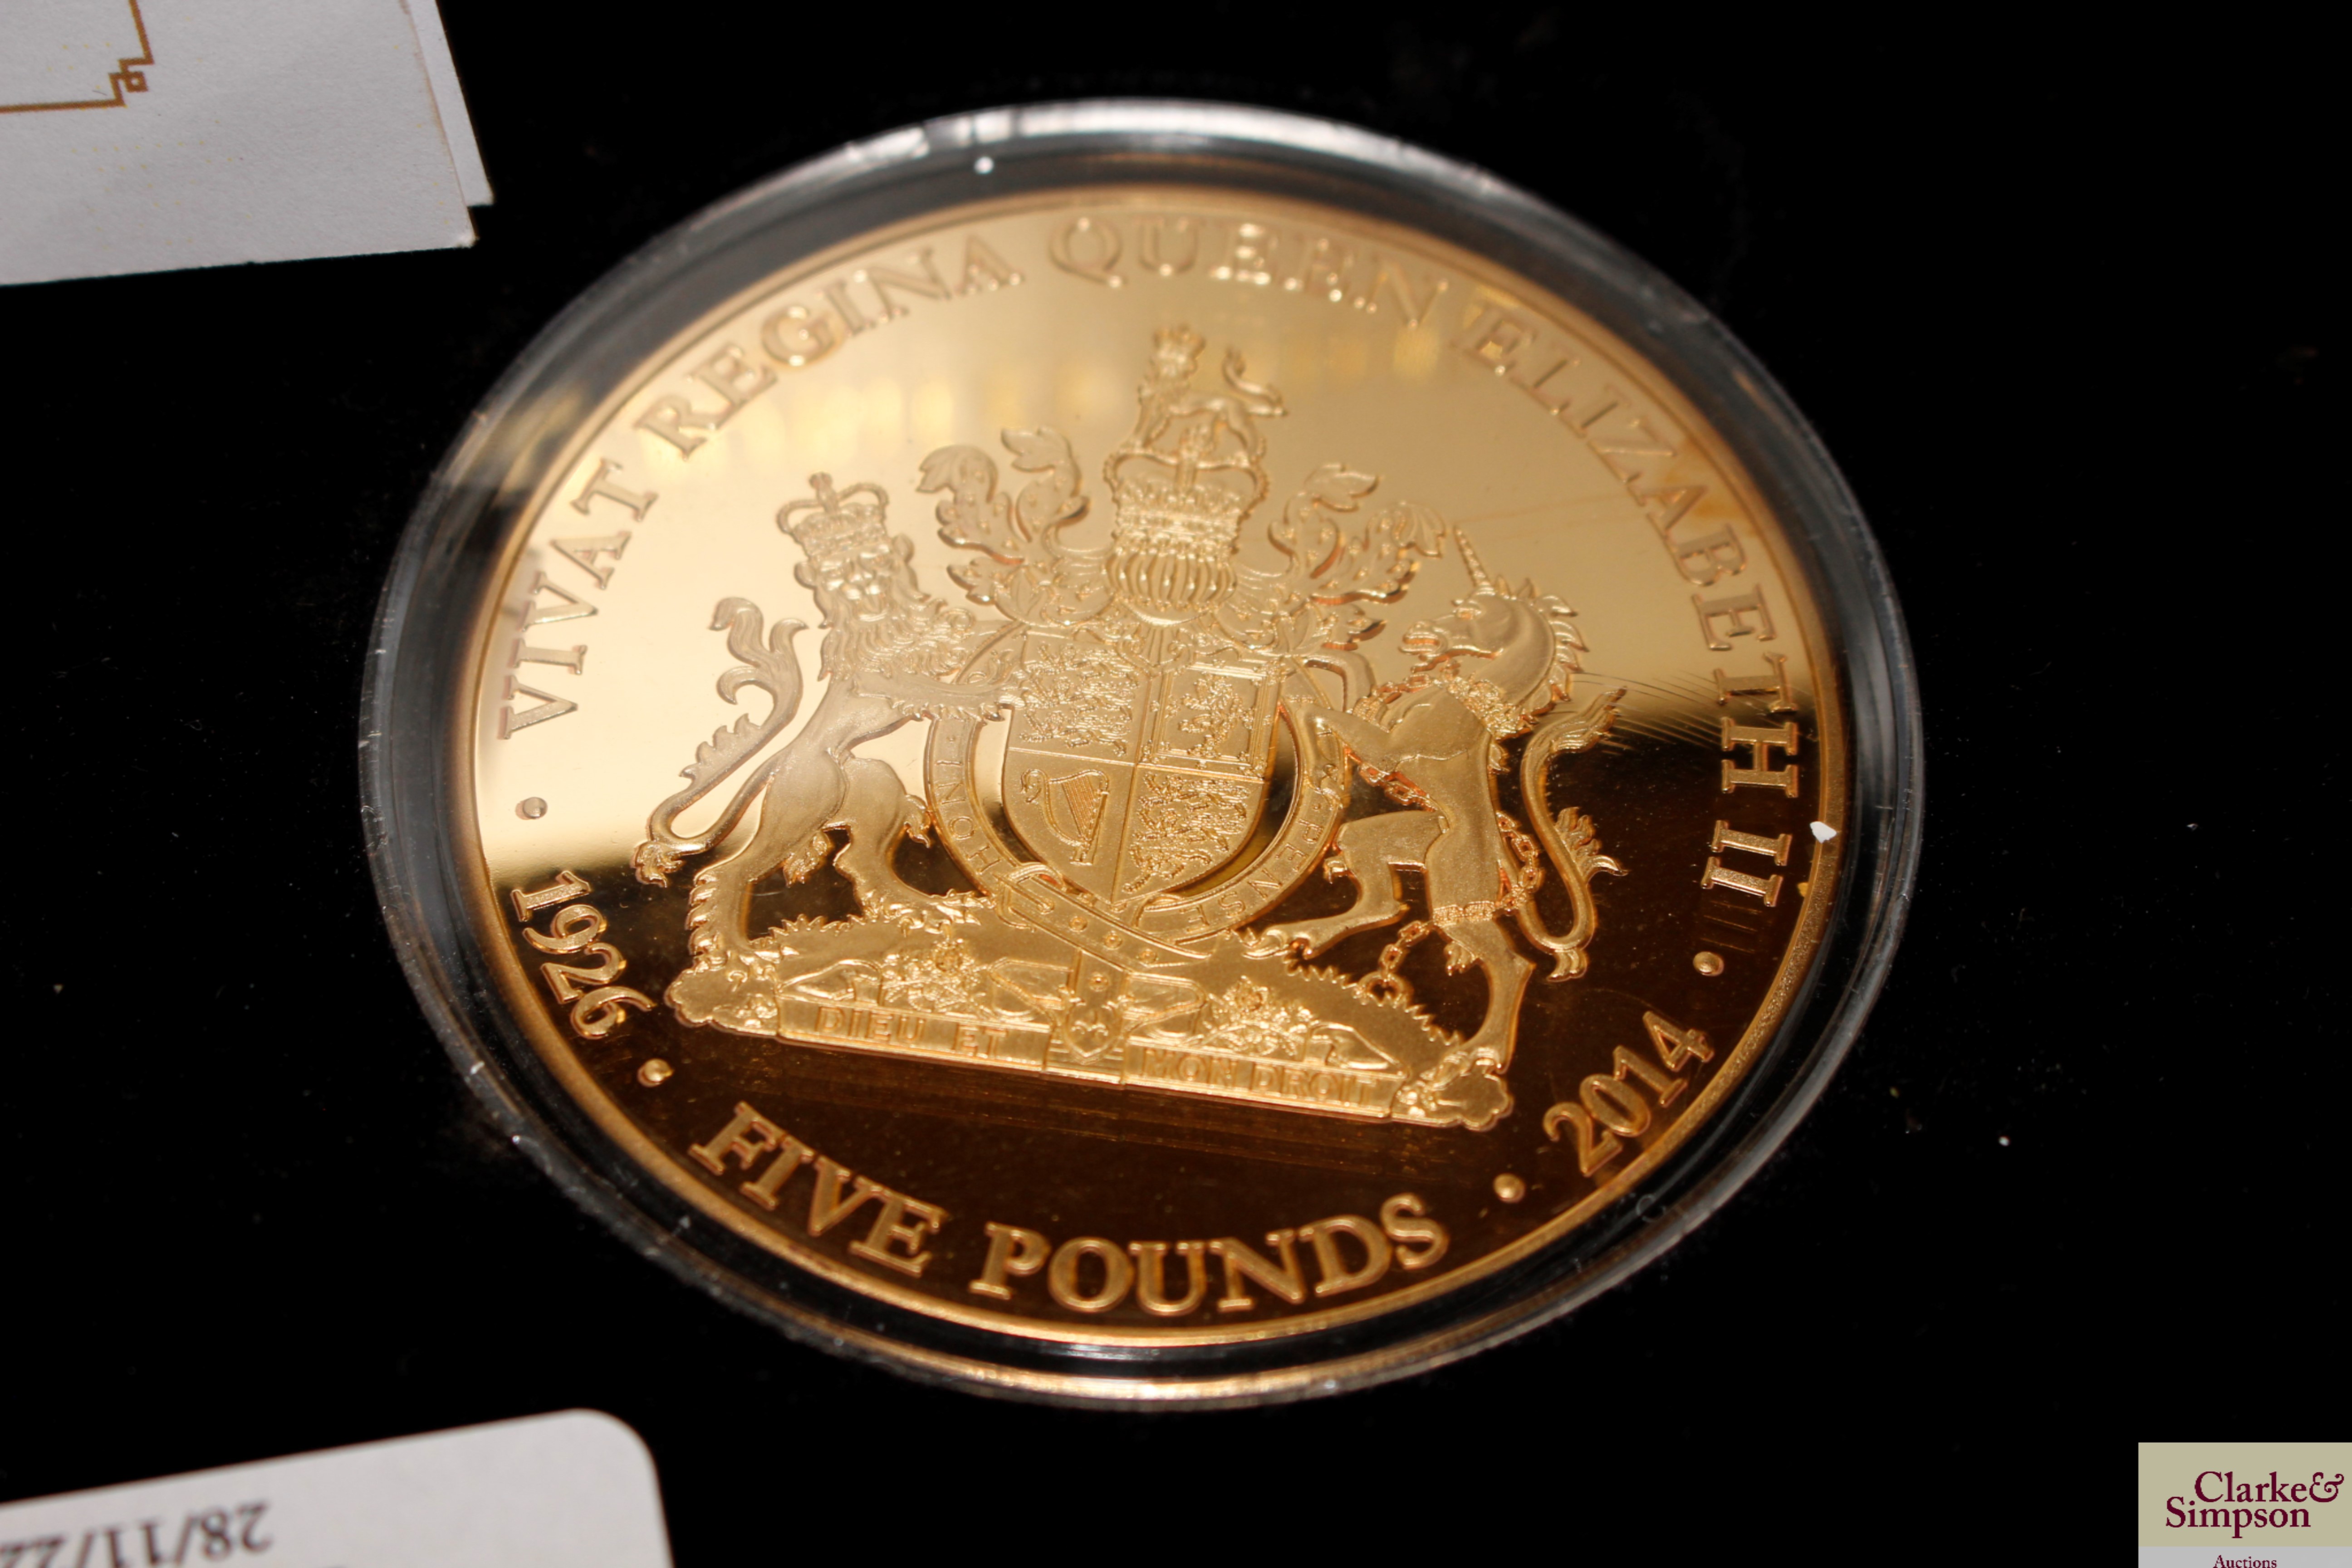 The Queen's 88th birthday super size £5 proof coin - Image 2 of 6